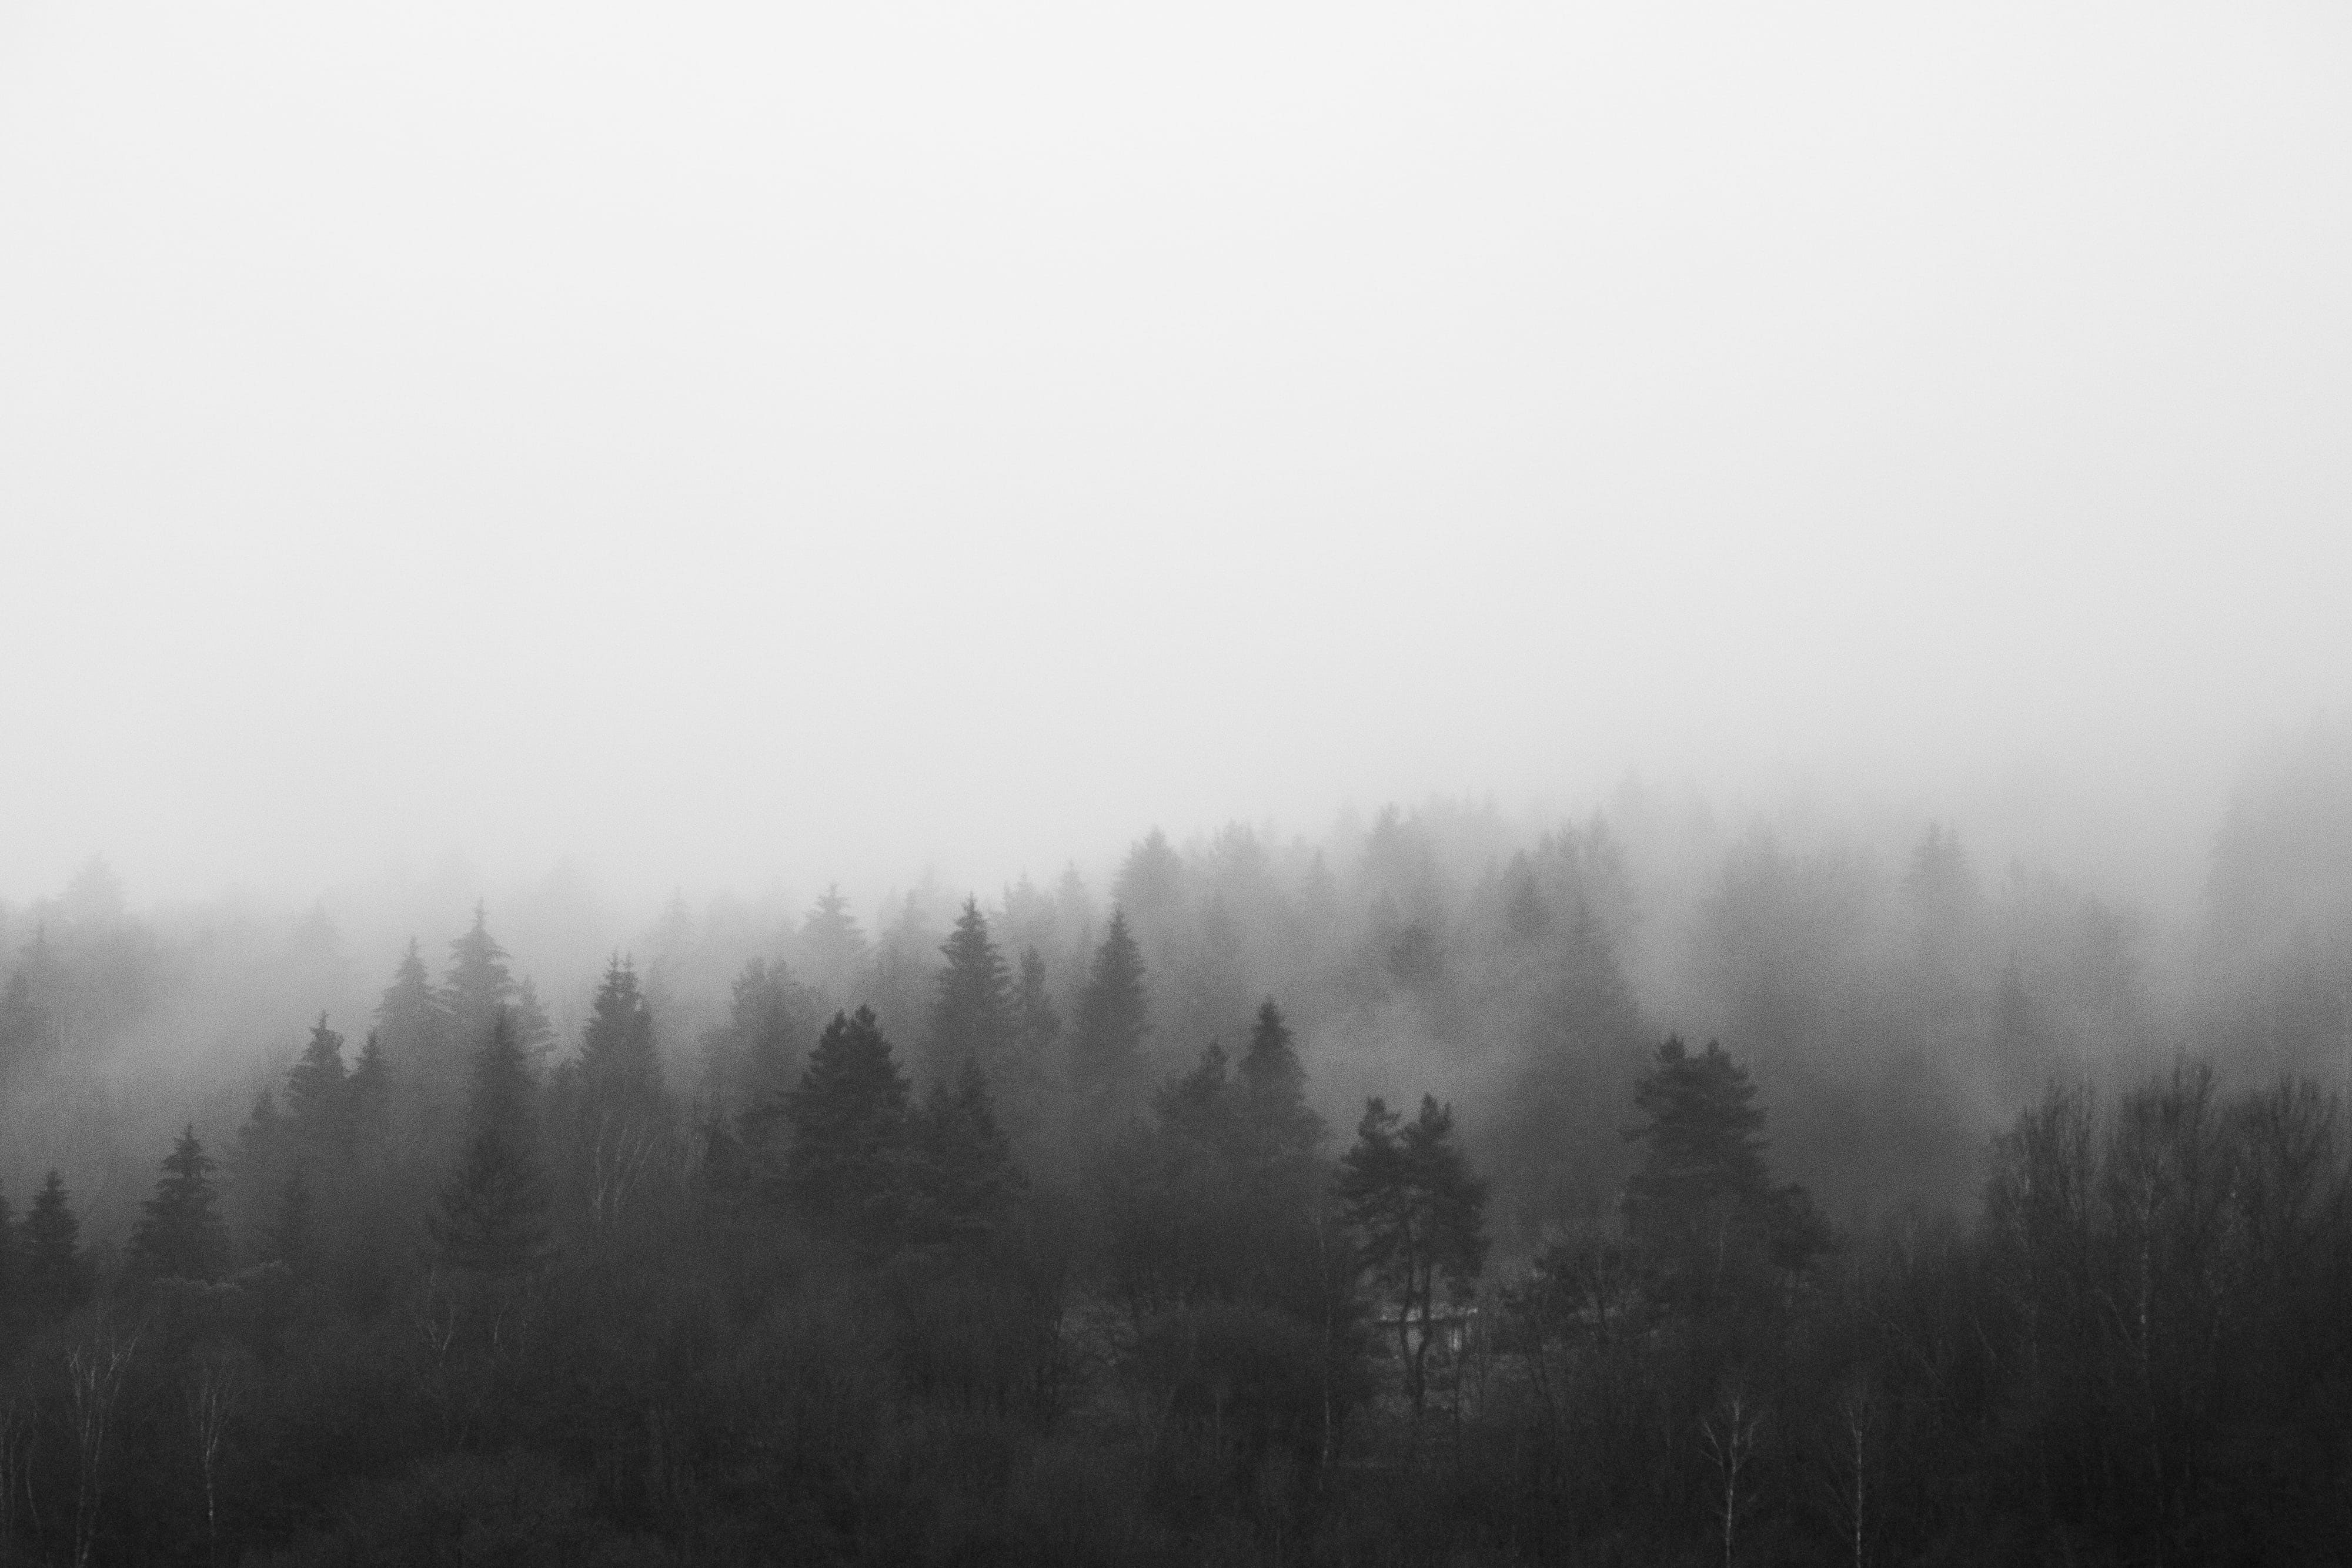 Wallpaper Black And White Morning Foggy Forest, Bw, Clouds - Wallpaperforu